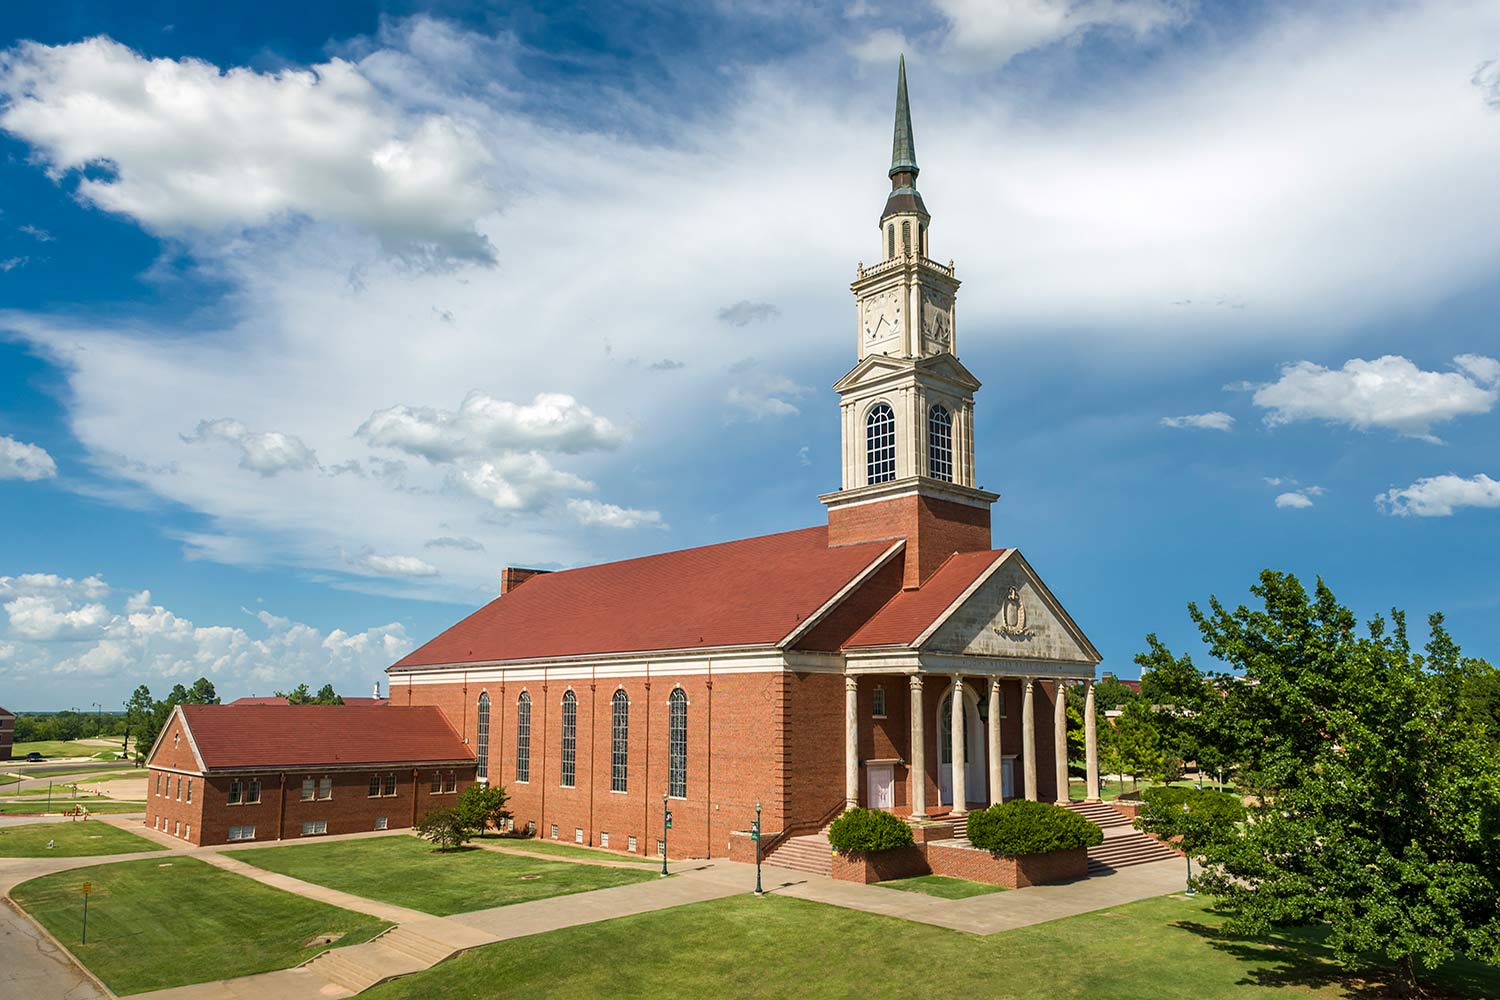 OBU Earns Top Rankings for Best Regional Colleges by U.S. News & World